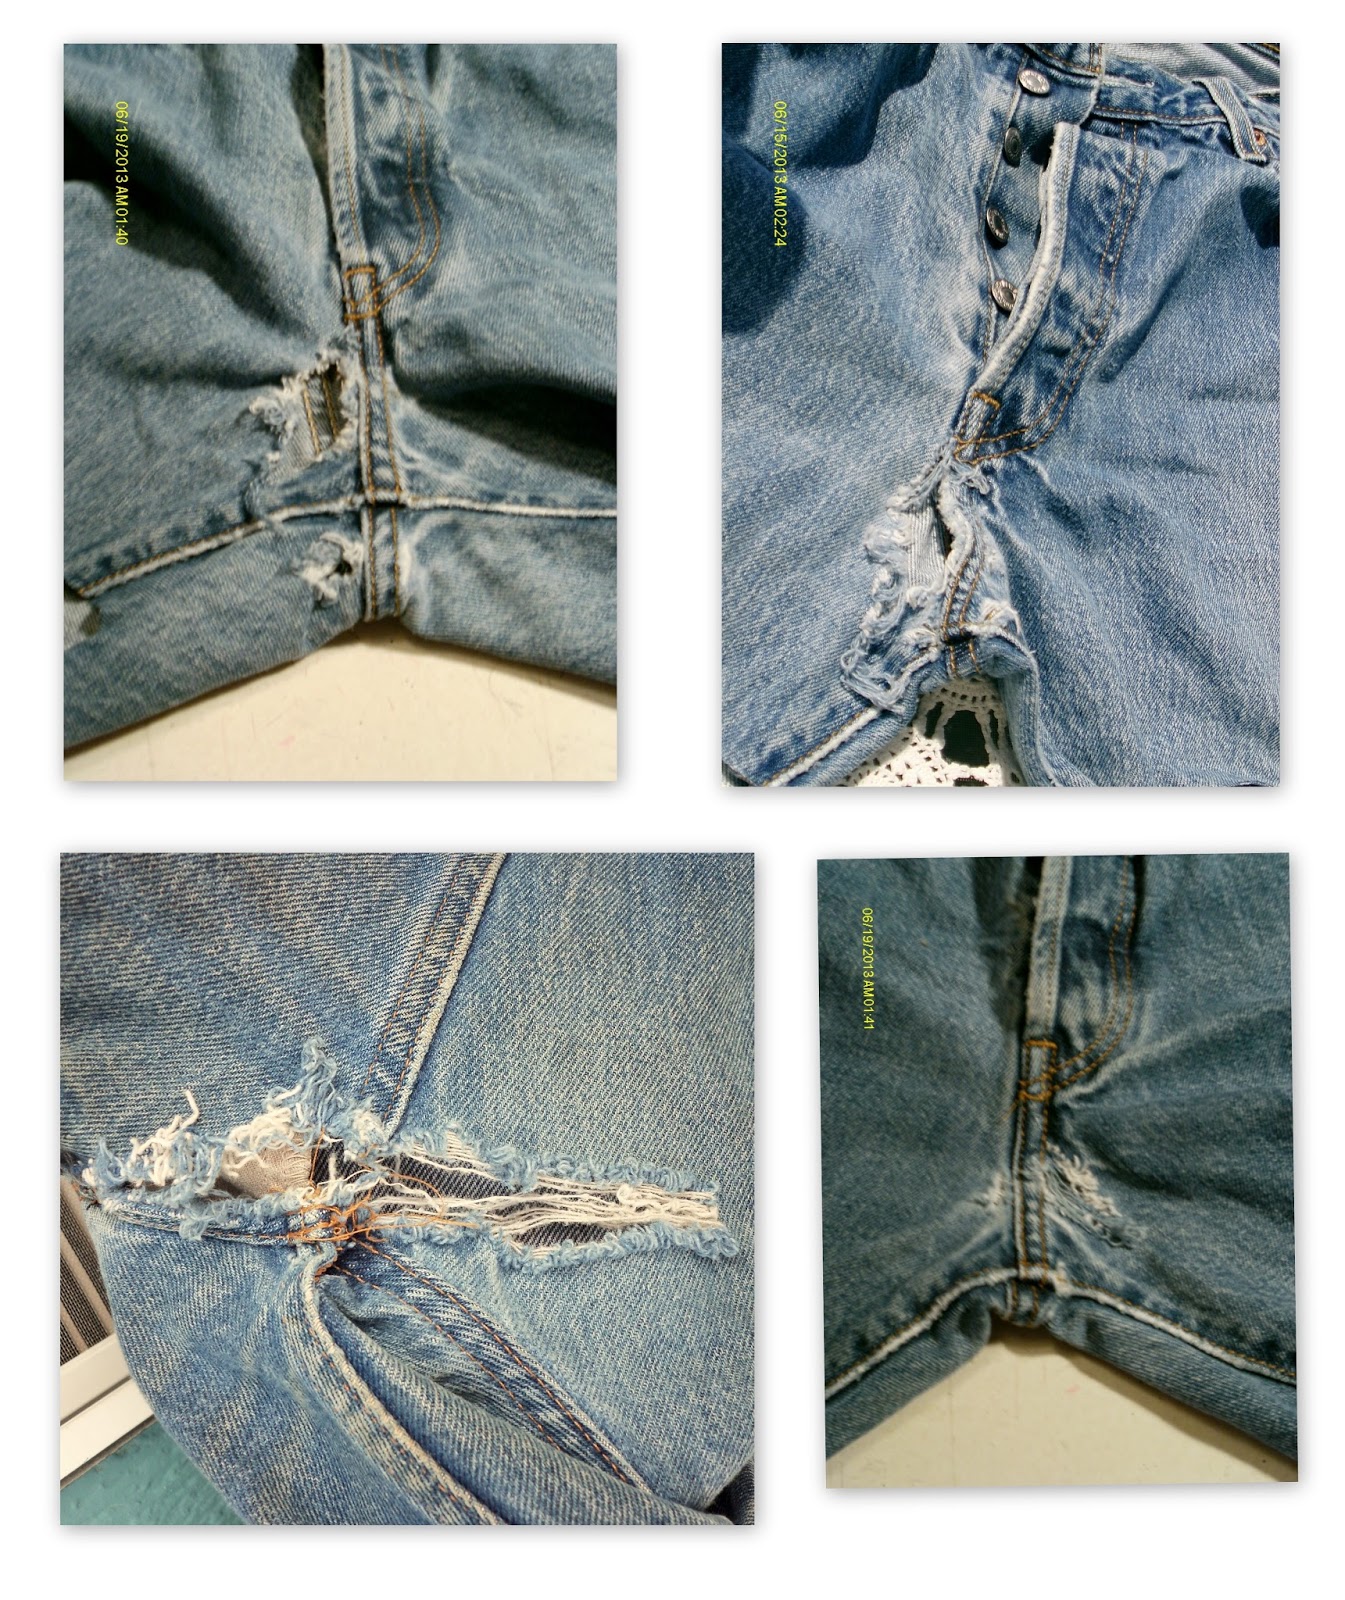 How to Fix Snagged Jeans - iFixit Repair Guide